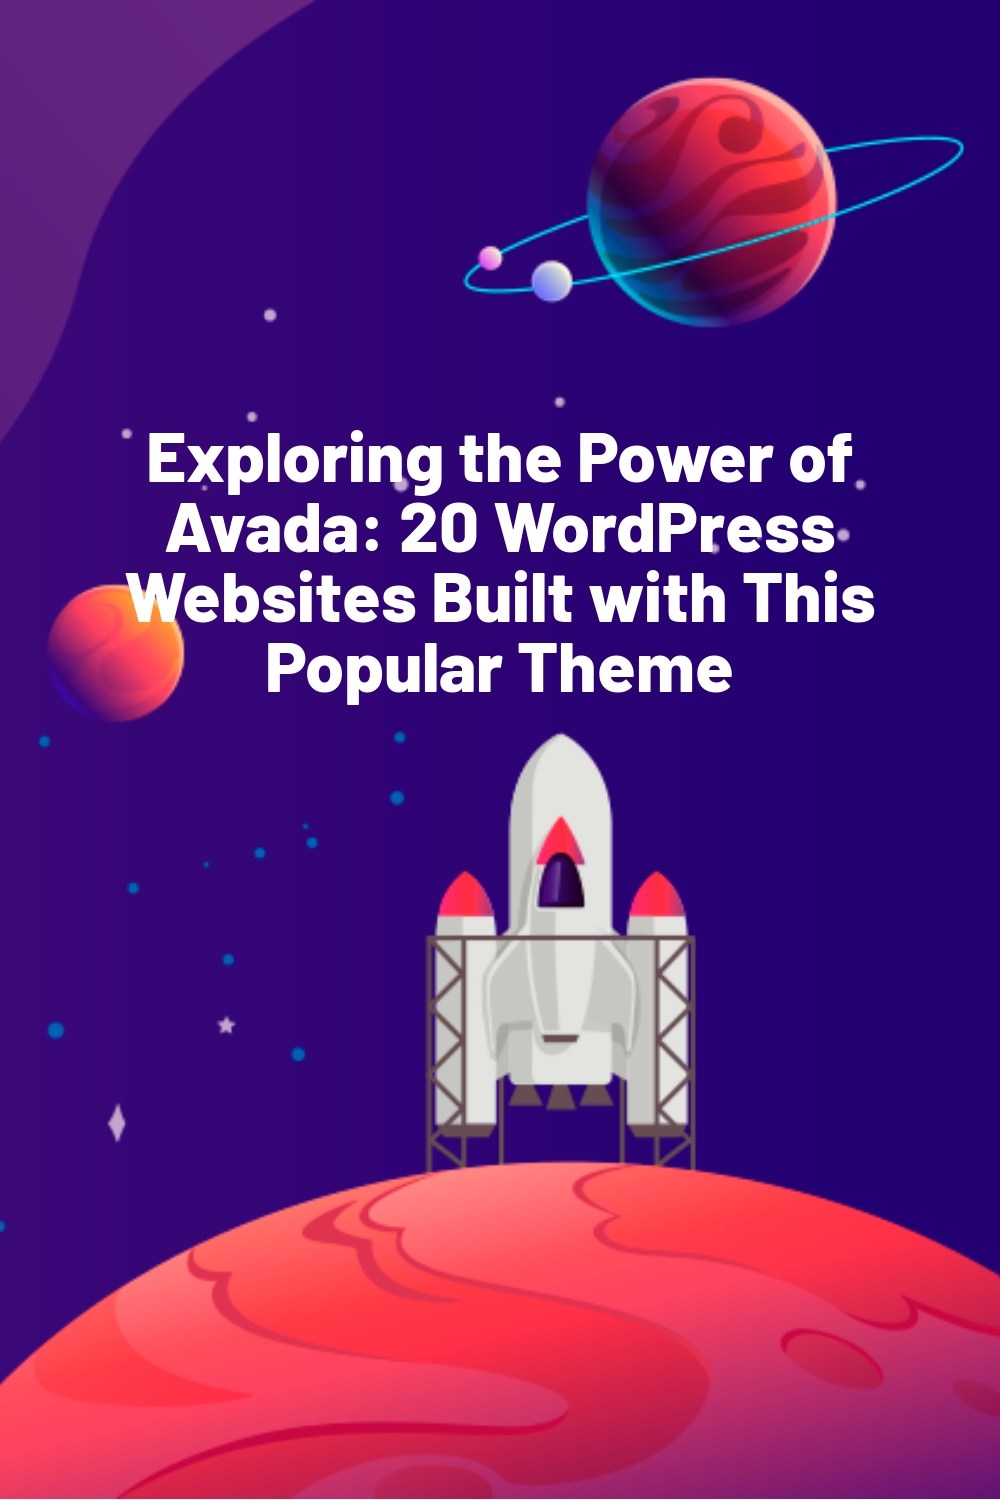 Exploring the Power of Avada: 20 WordPress Websites Built with This Popular Theme